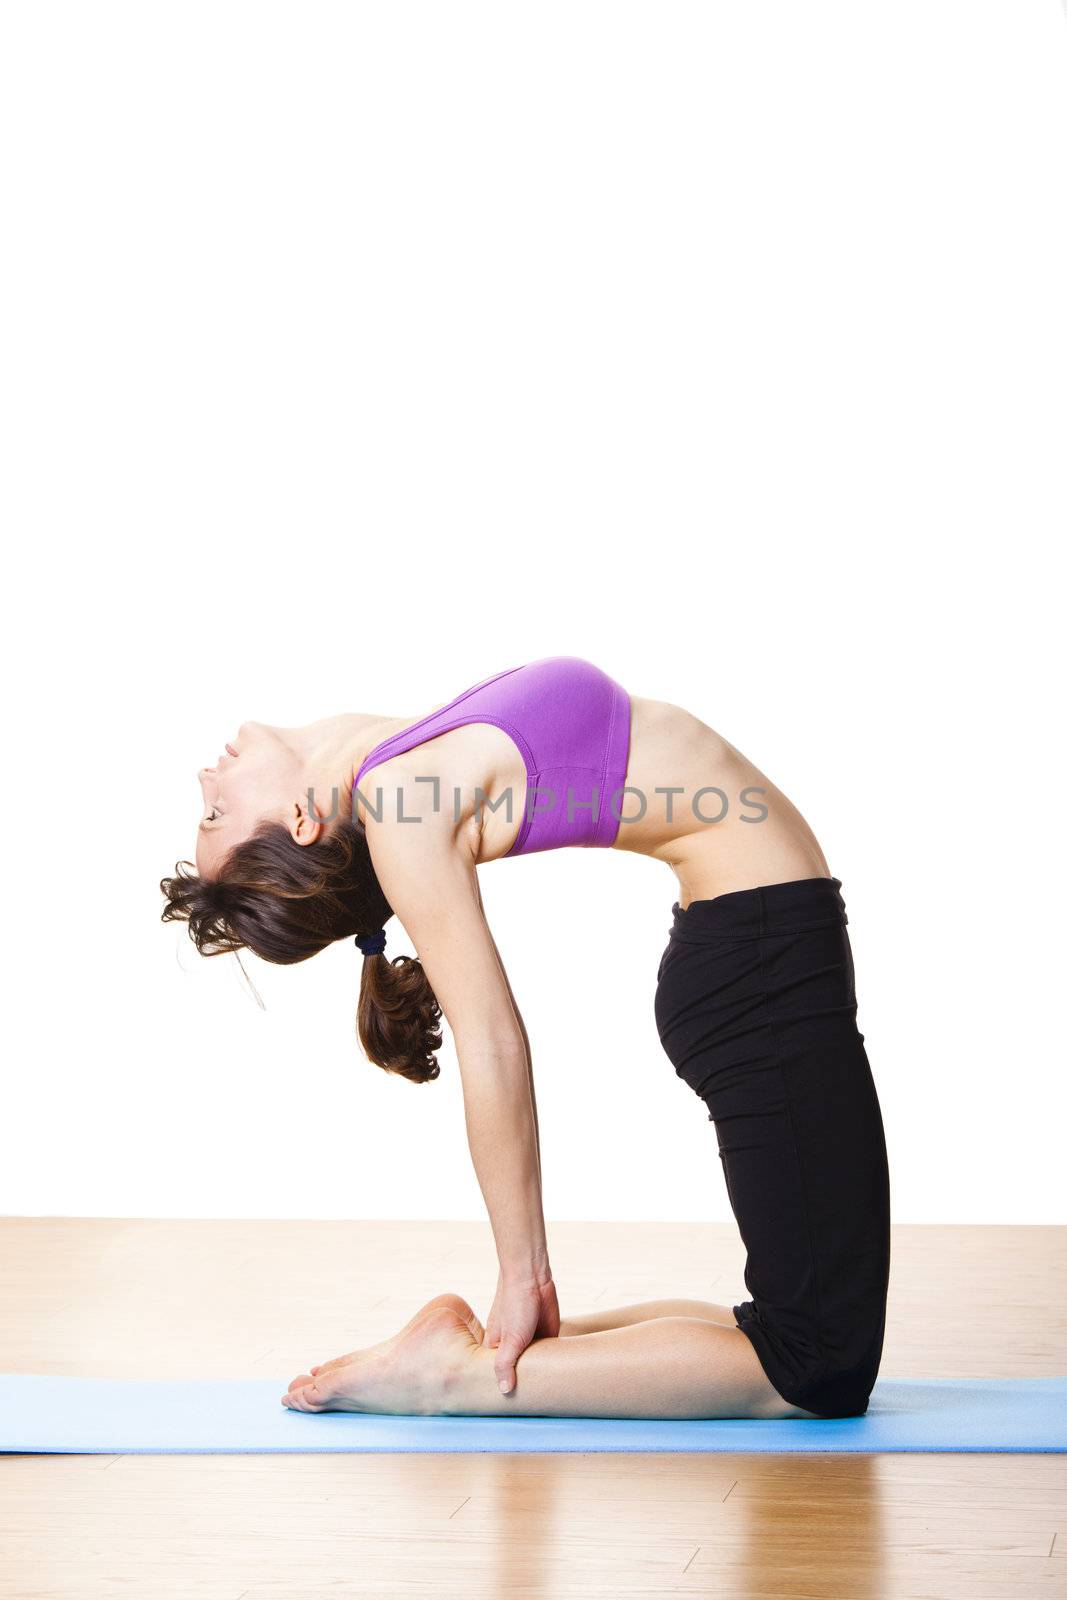 Beautiful and athletic young woman doing yoga exercises